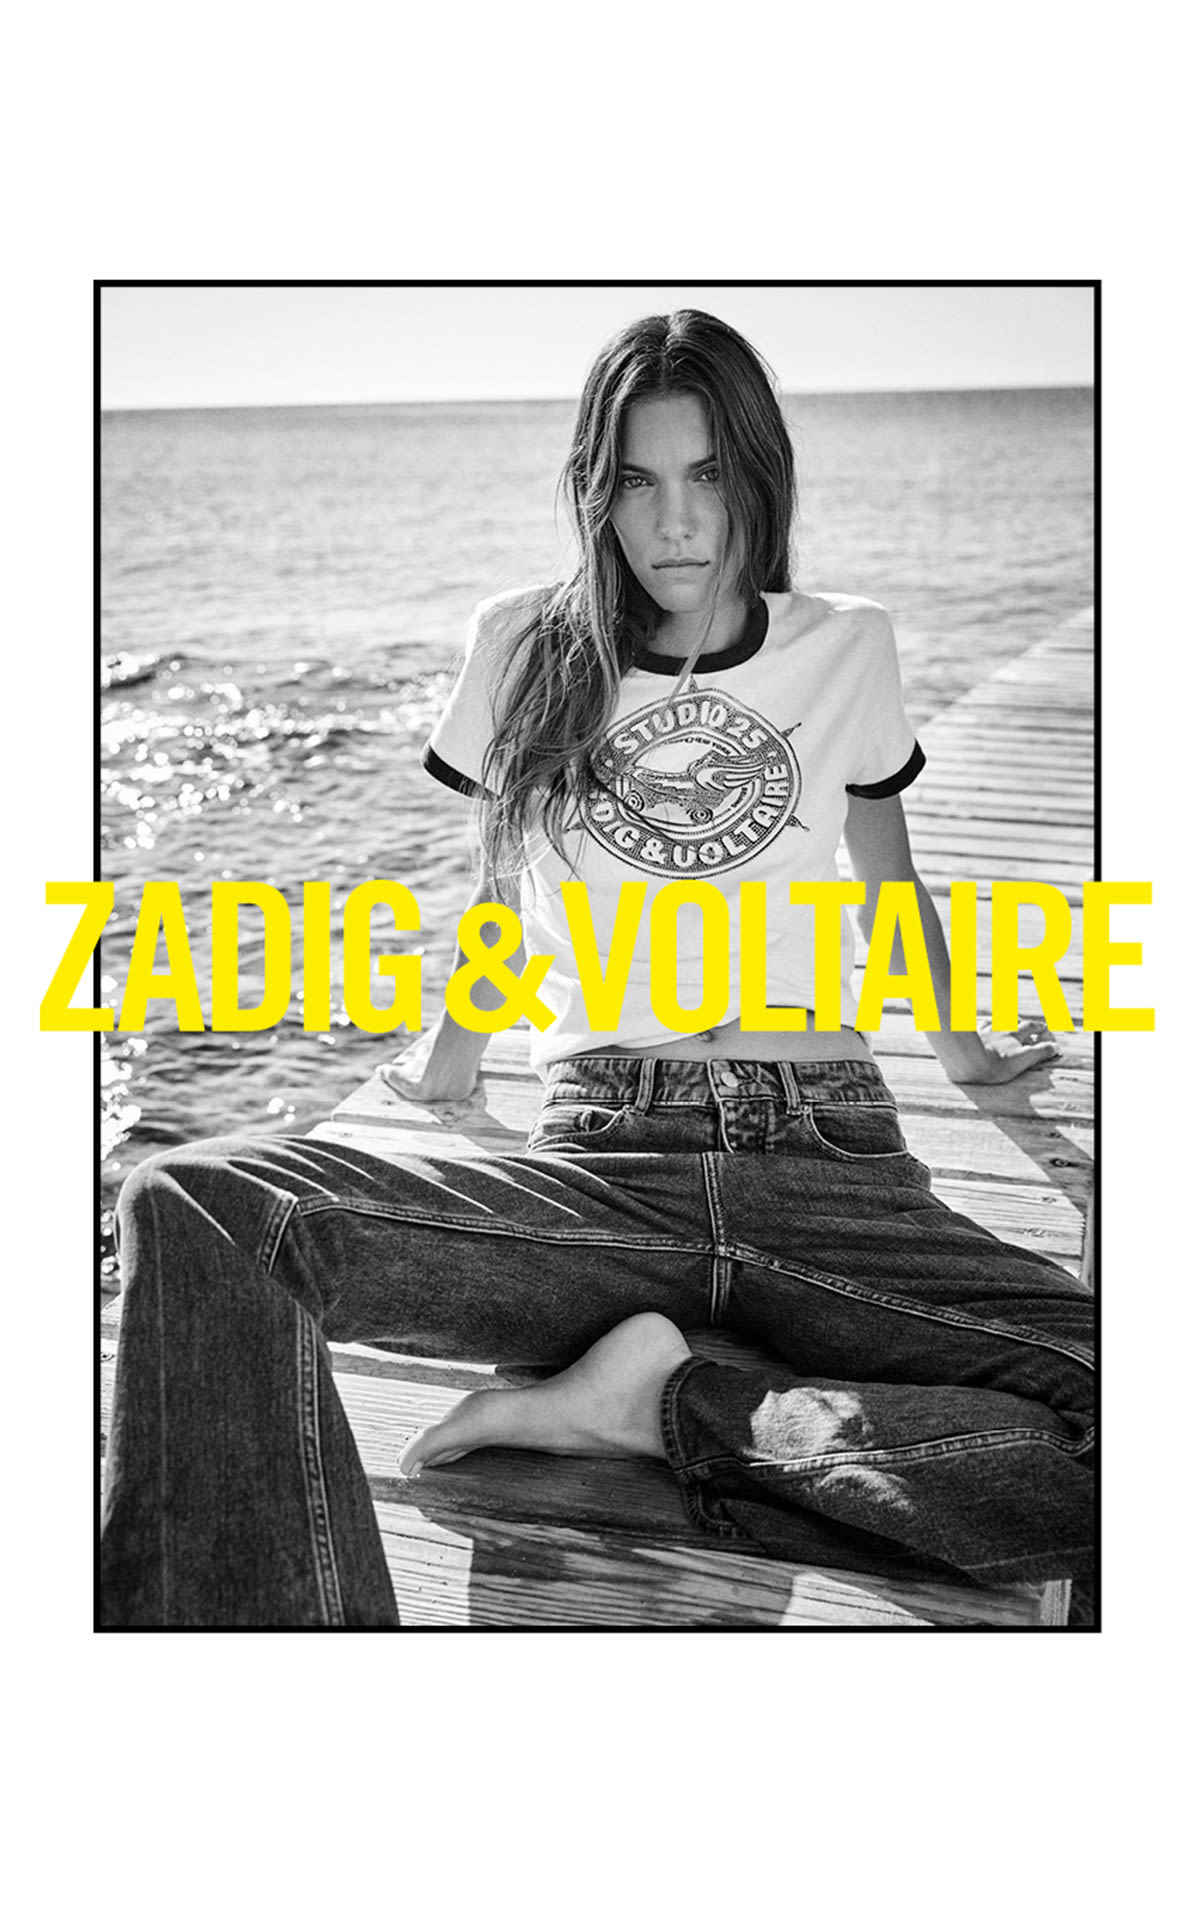 Two models wearing Zadig&Voltaire clothes